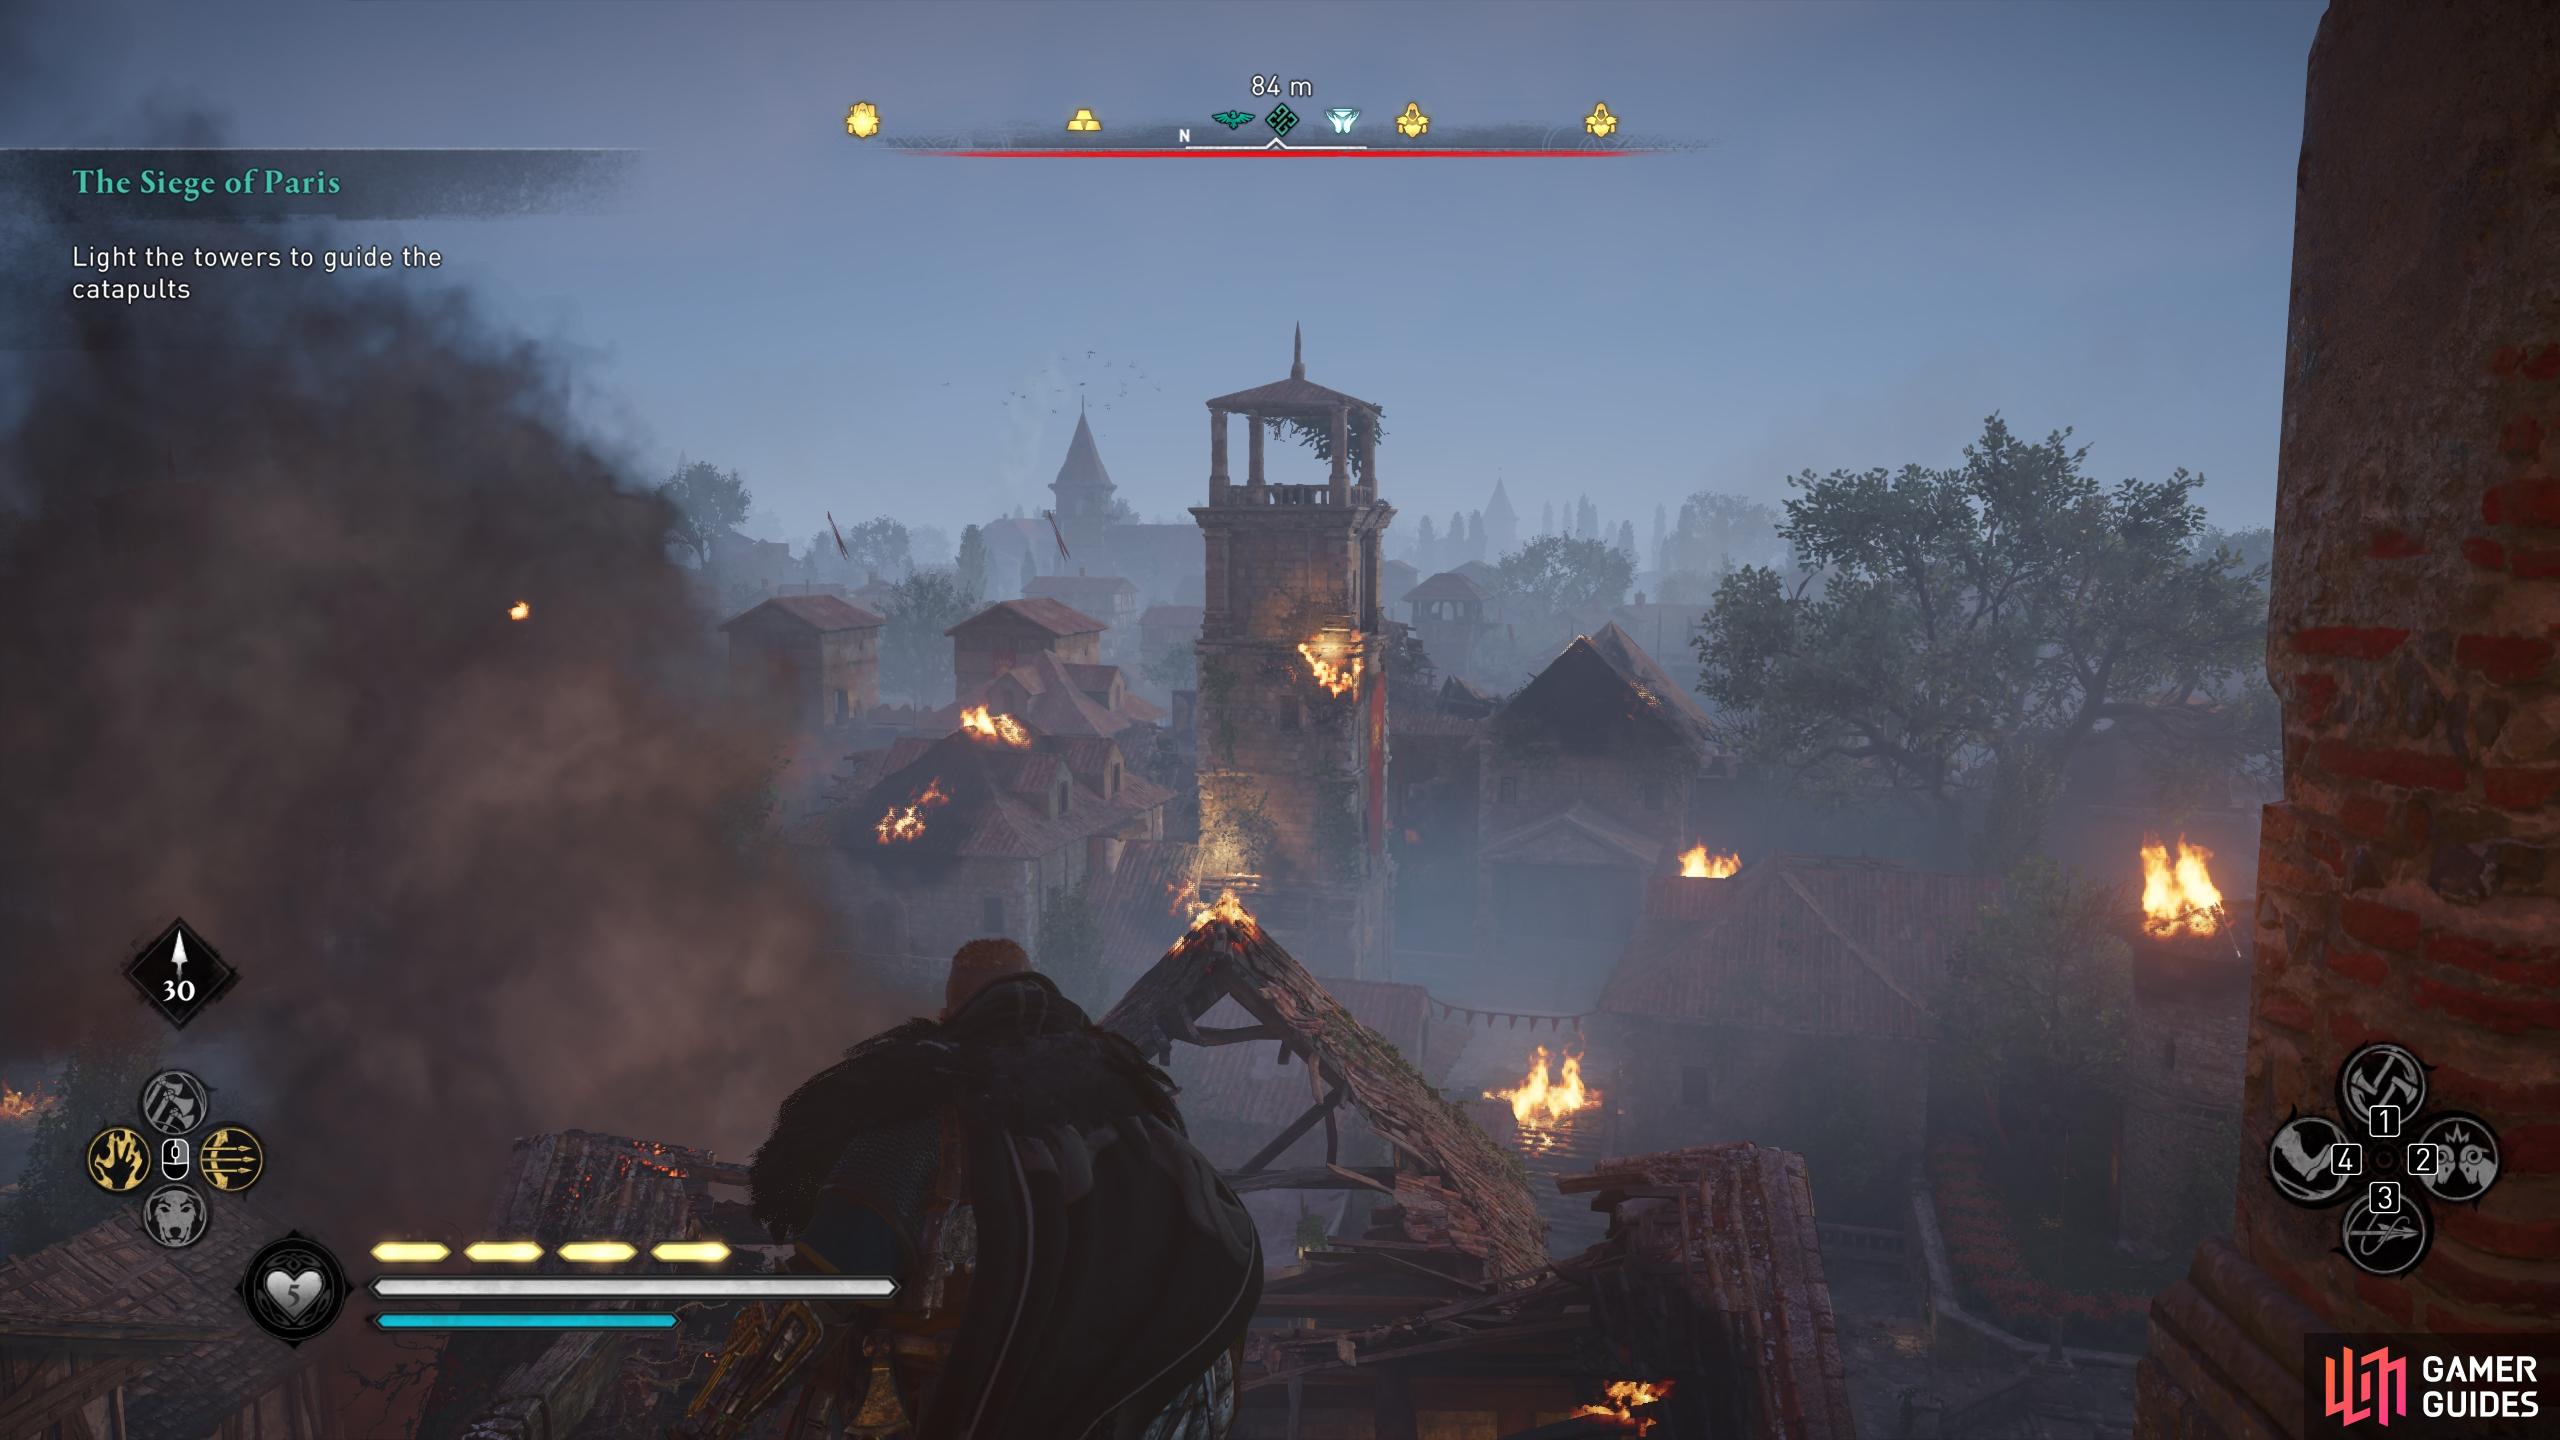 Head to the second tower through the burning building to the north.